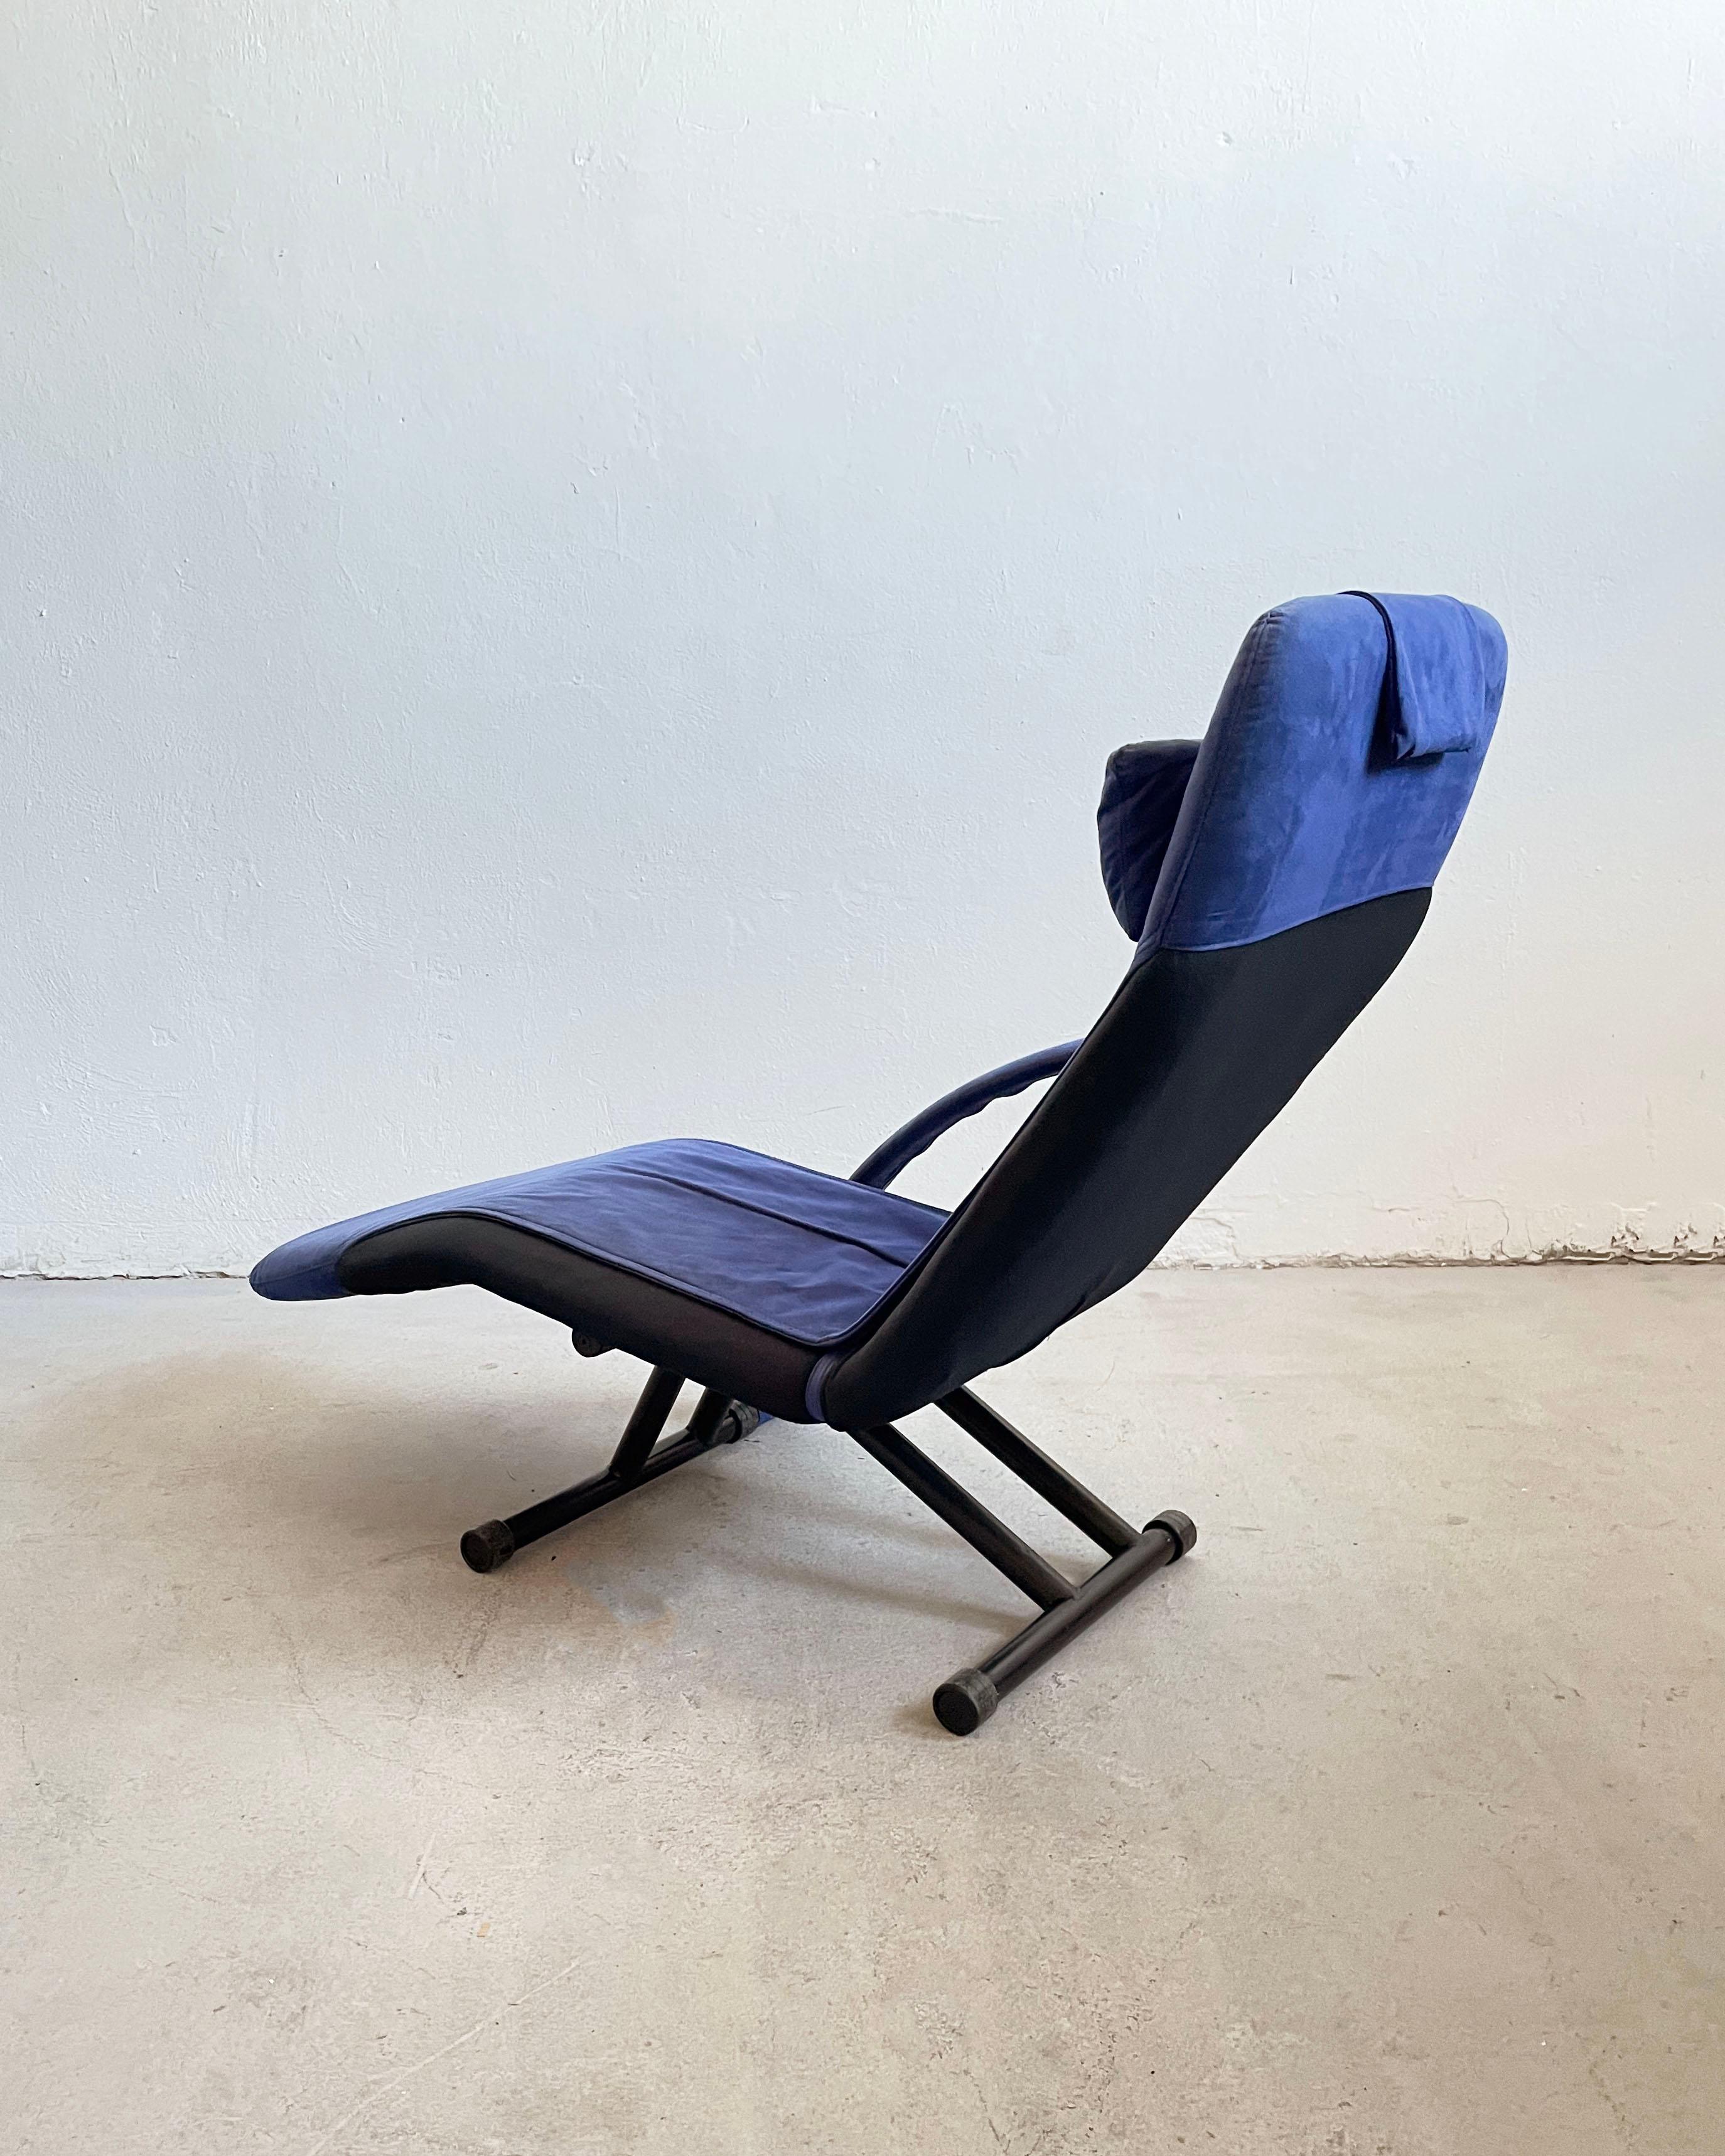 1980's design lounge chair, chaise longue, model Flexa by Adriano Piazzesi for Italian company Arketipo from 1987. 
Metal and PVC structure. Black padded seat with blue microfiber removable cover. 
Good condition, whit some signs of wear consistent